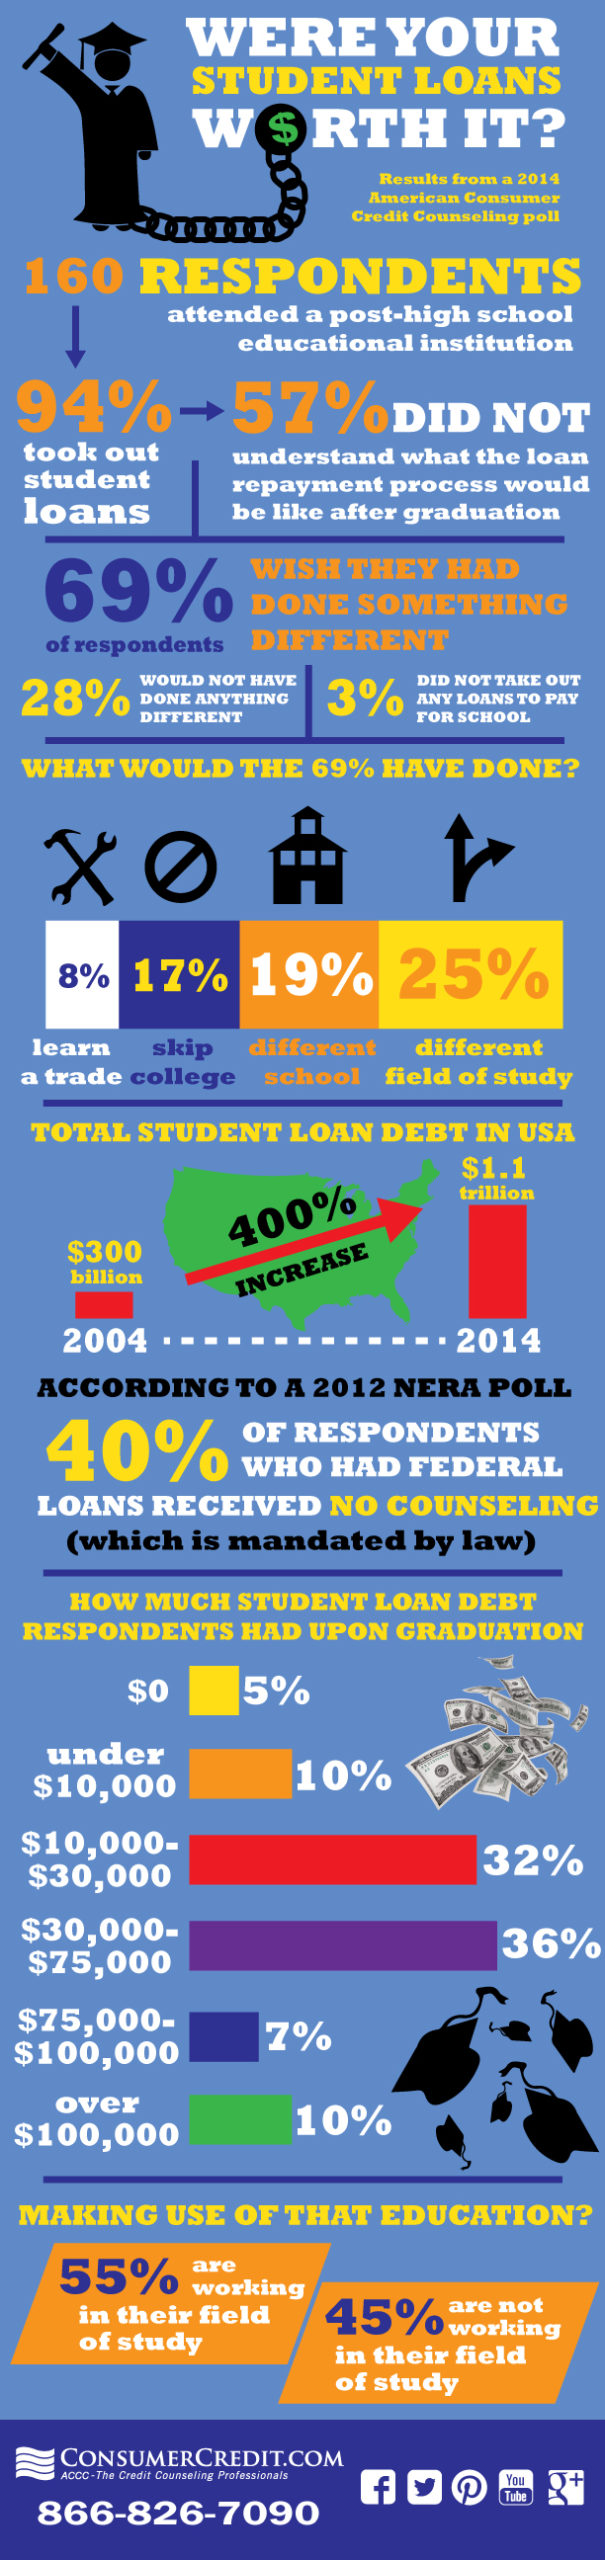 Were Your Student Loans Worth It?